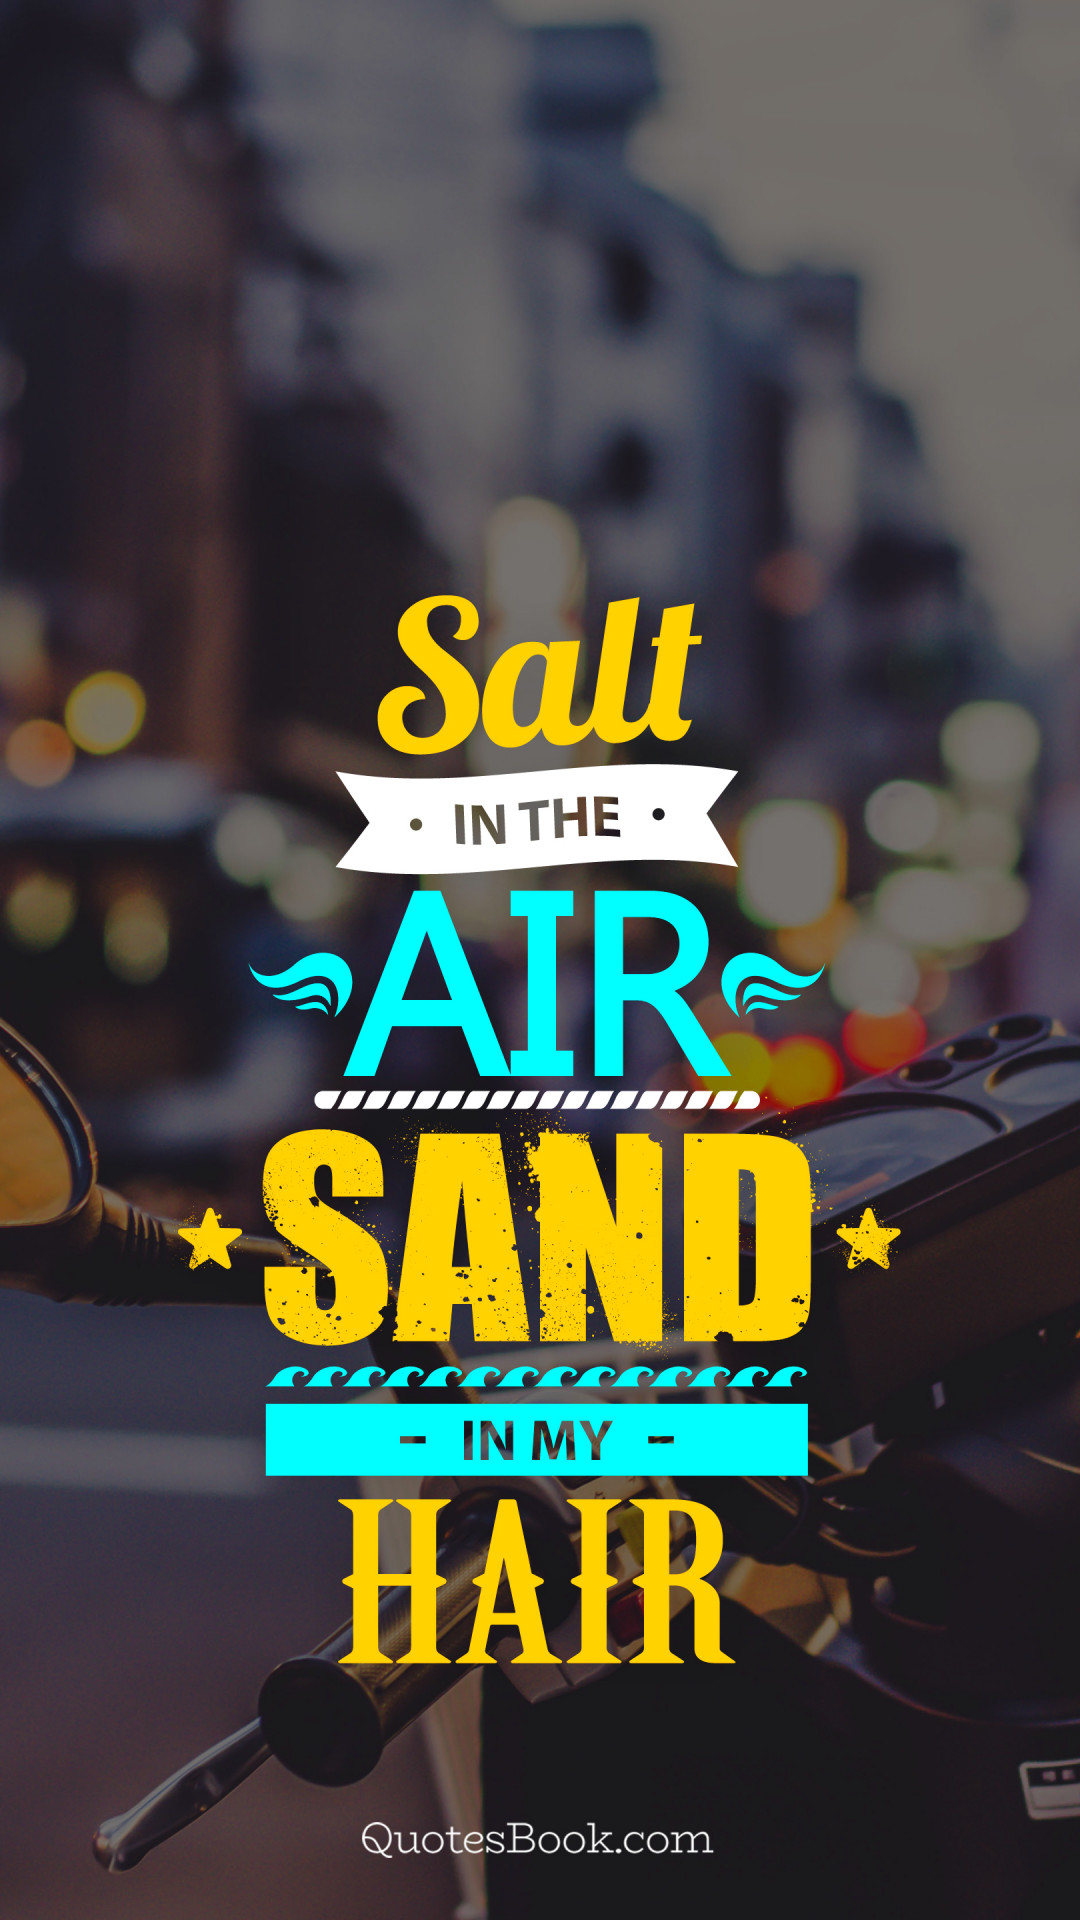 Salt in the air sand in my hair - Freedom Quotes